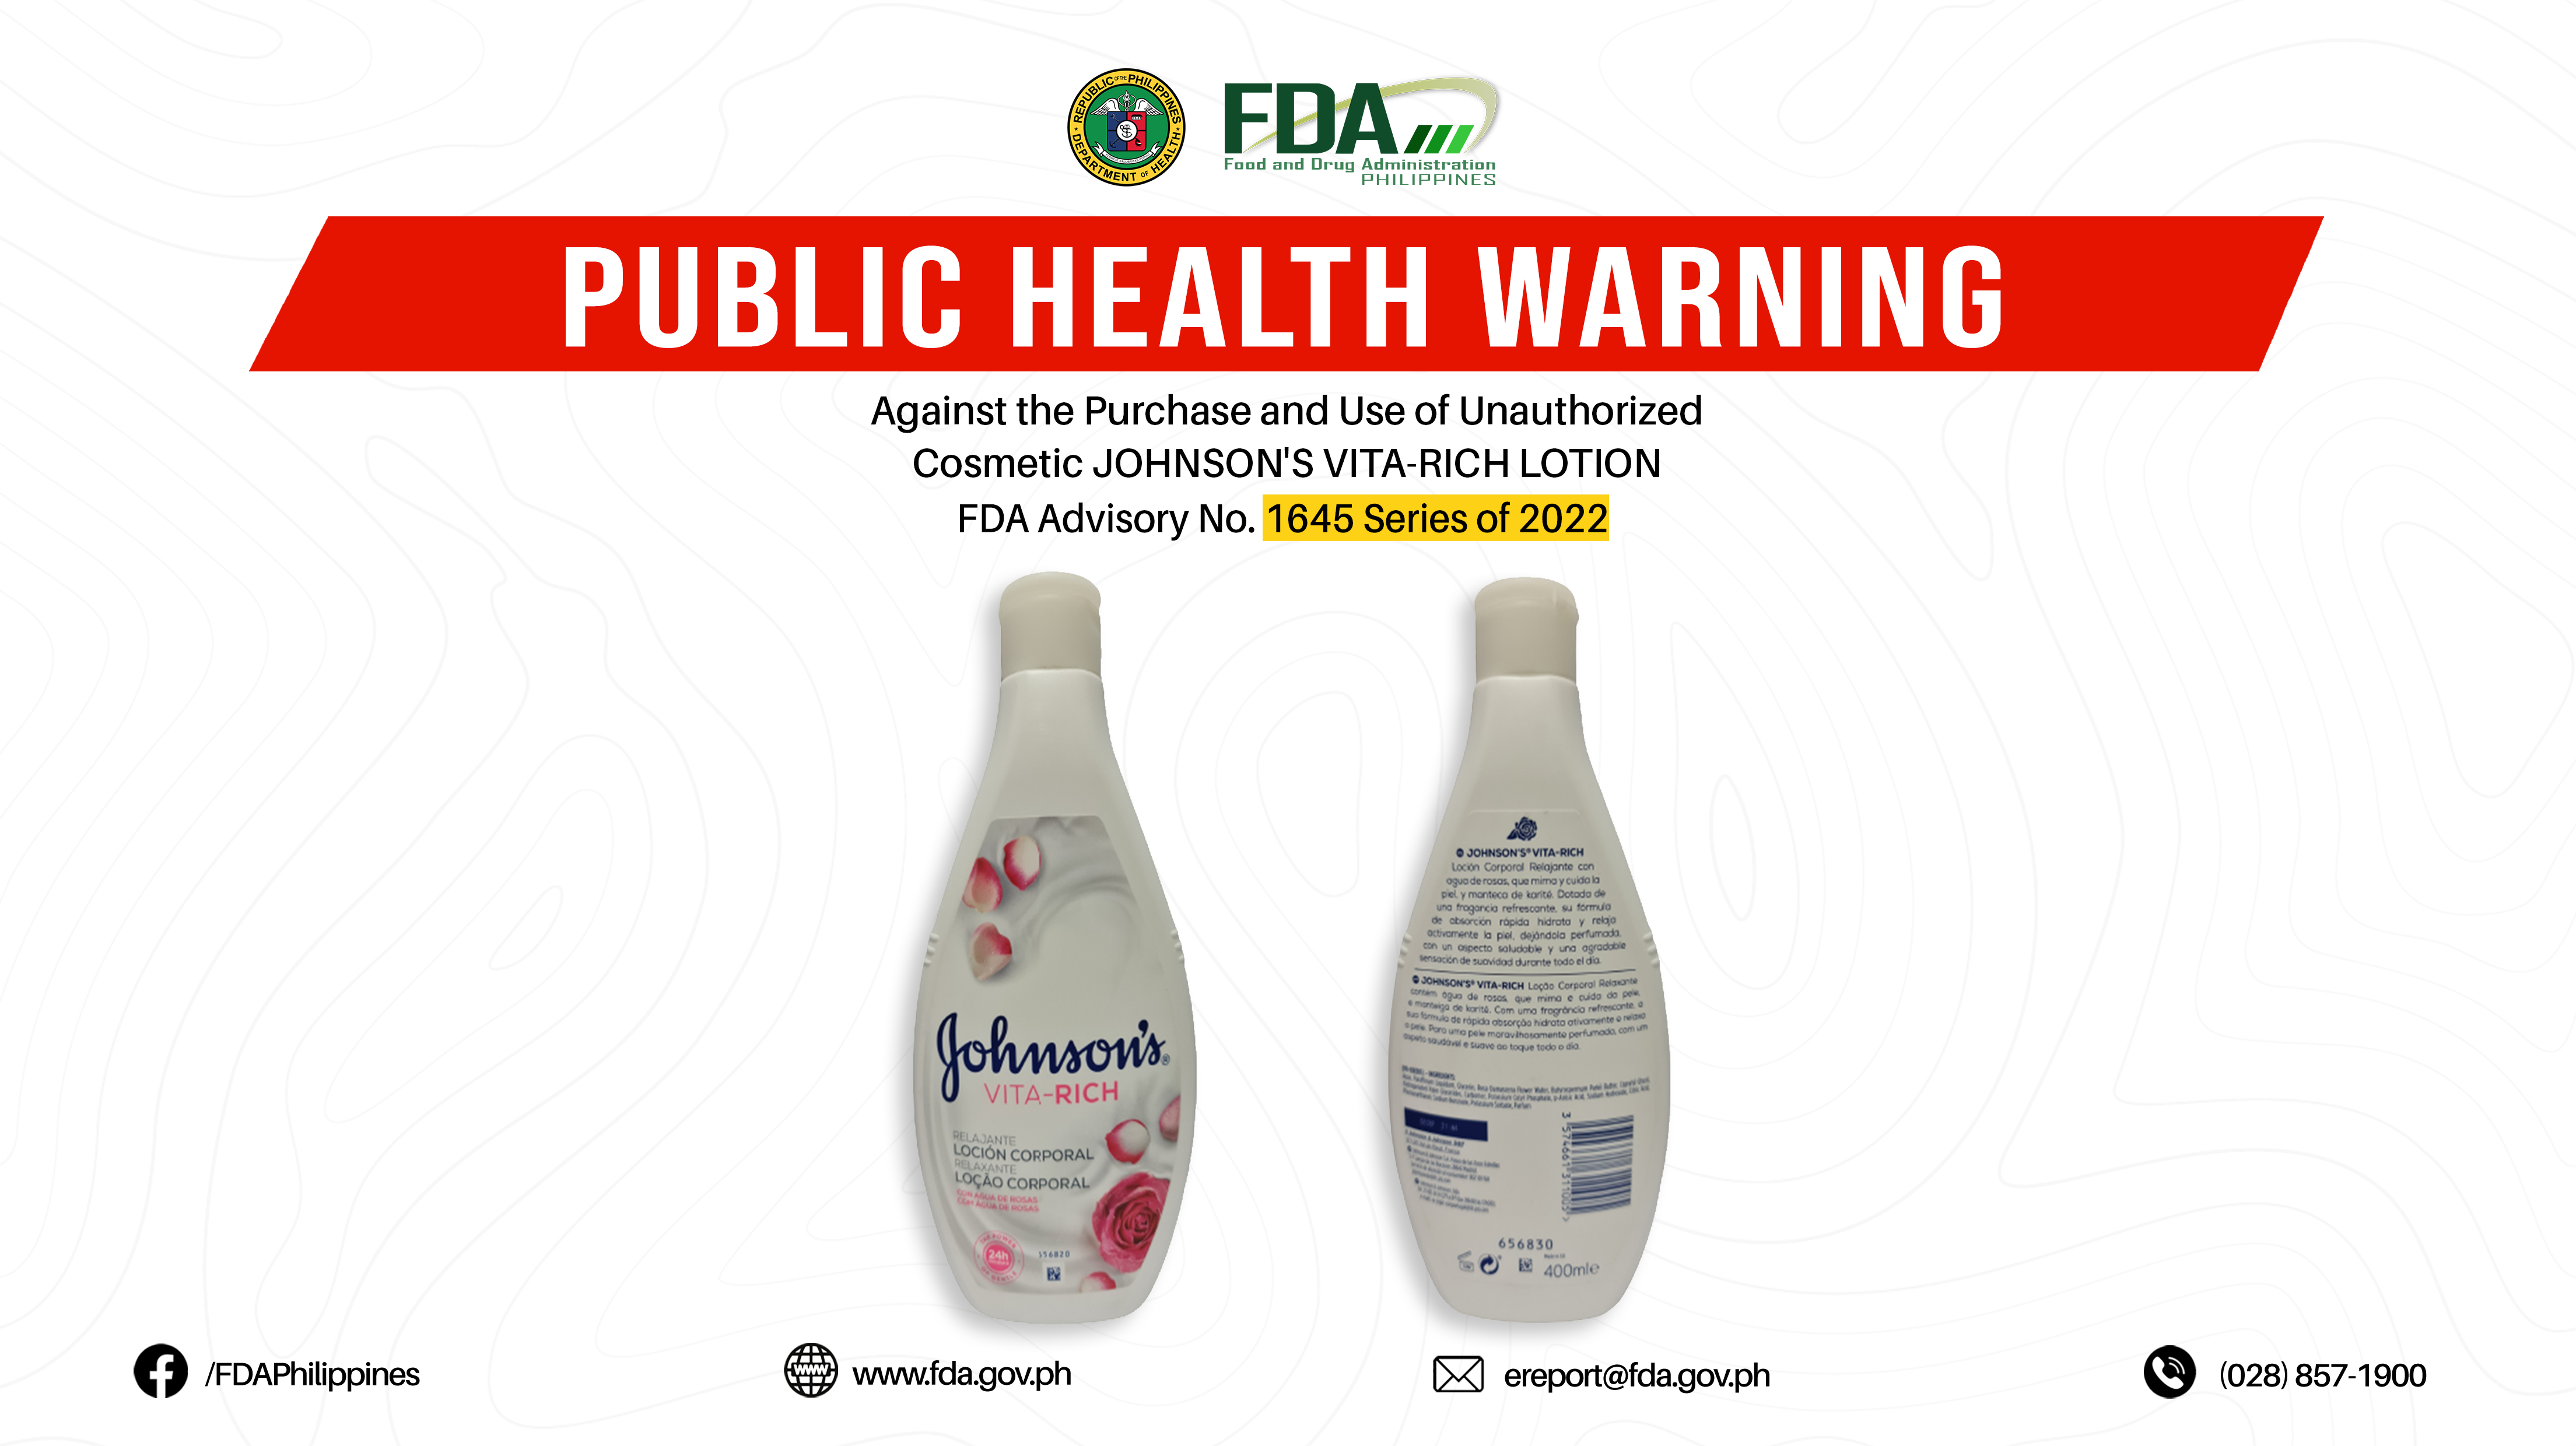 FDA Advisory No.2022-1645 || Public Health Warning Against the Purchase and Use of Unauthorized Cosmetic JOHNSON’S VITA-RICH LOTION